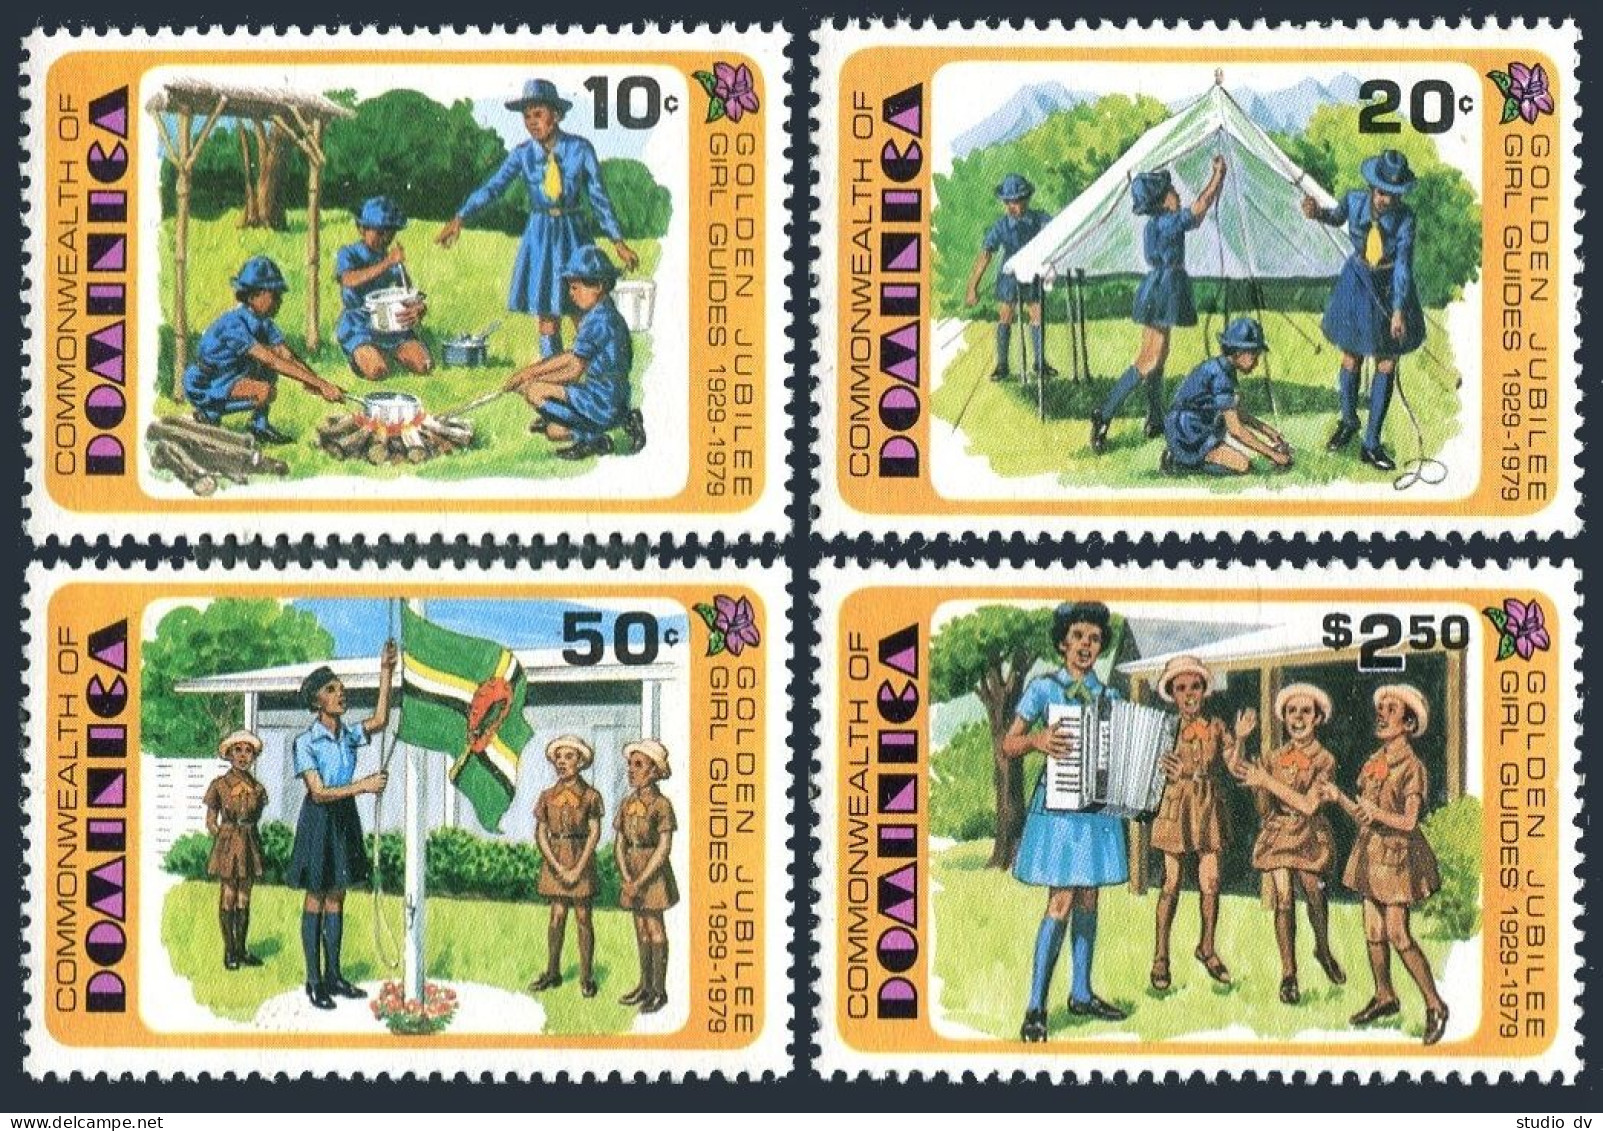 Dominica 630-634, MNH Michel 637-640,Bl.57. Girl Guides,50th Ann. 1979. Cooking, - Dominique (1978-...)